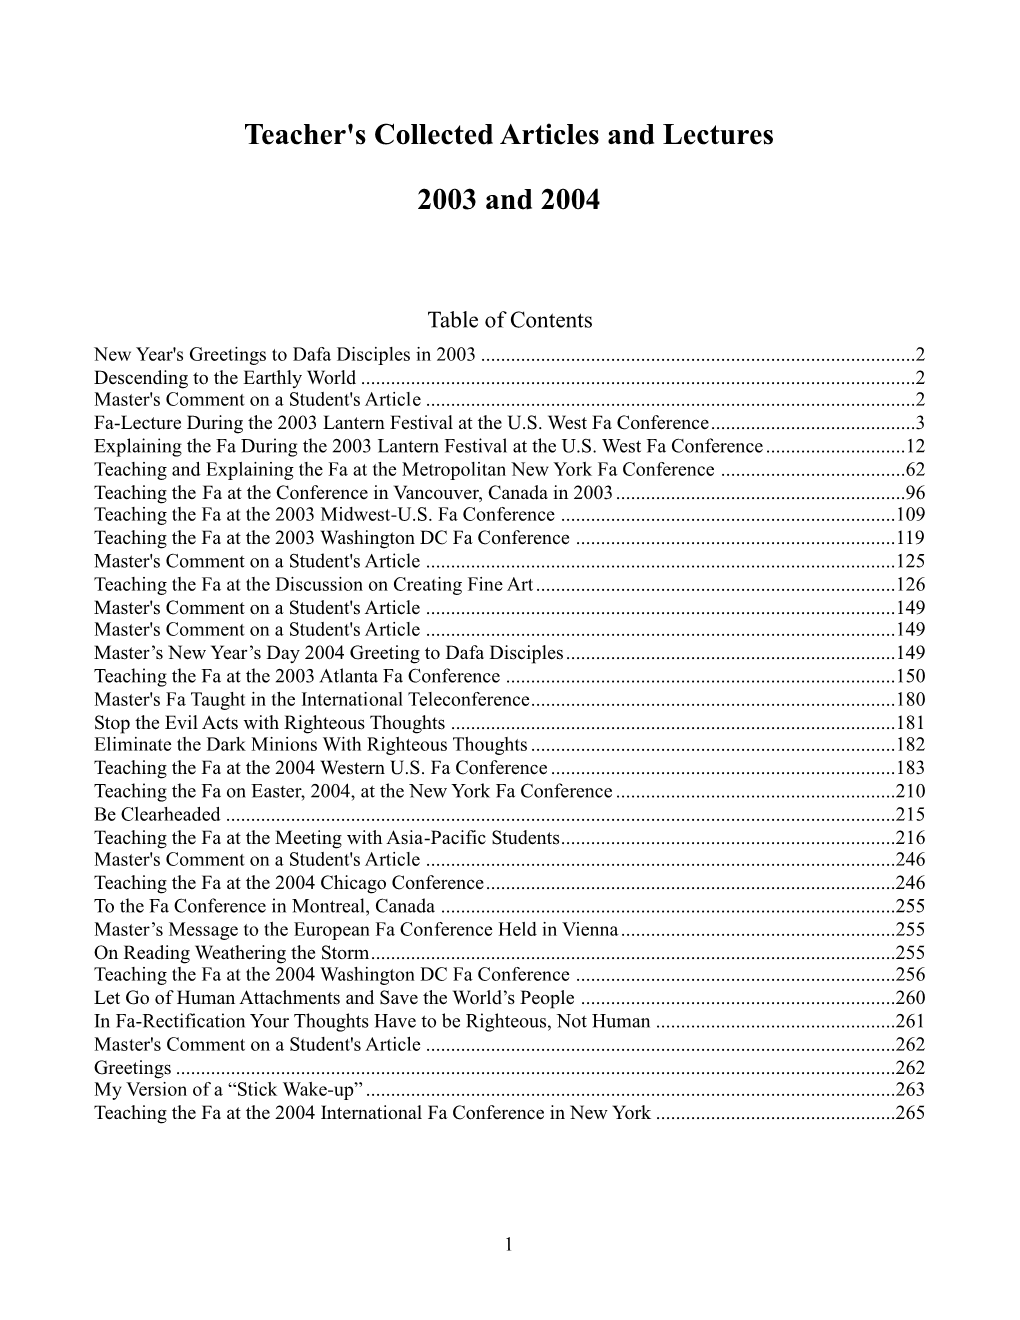 Teacher's Collected Articles and Lectures 2003 and 2004